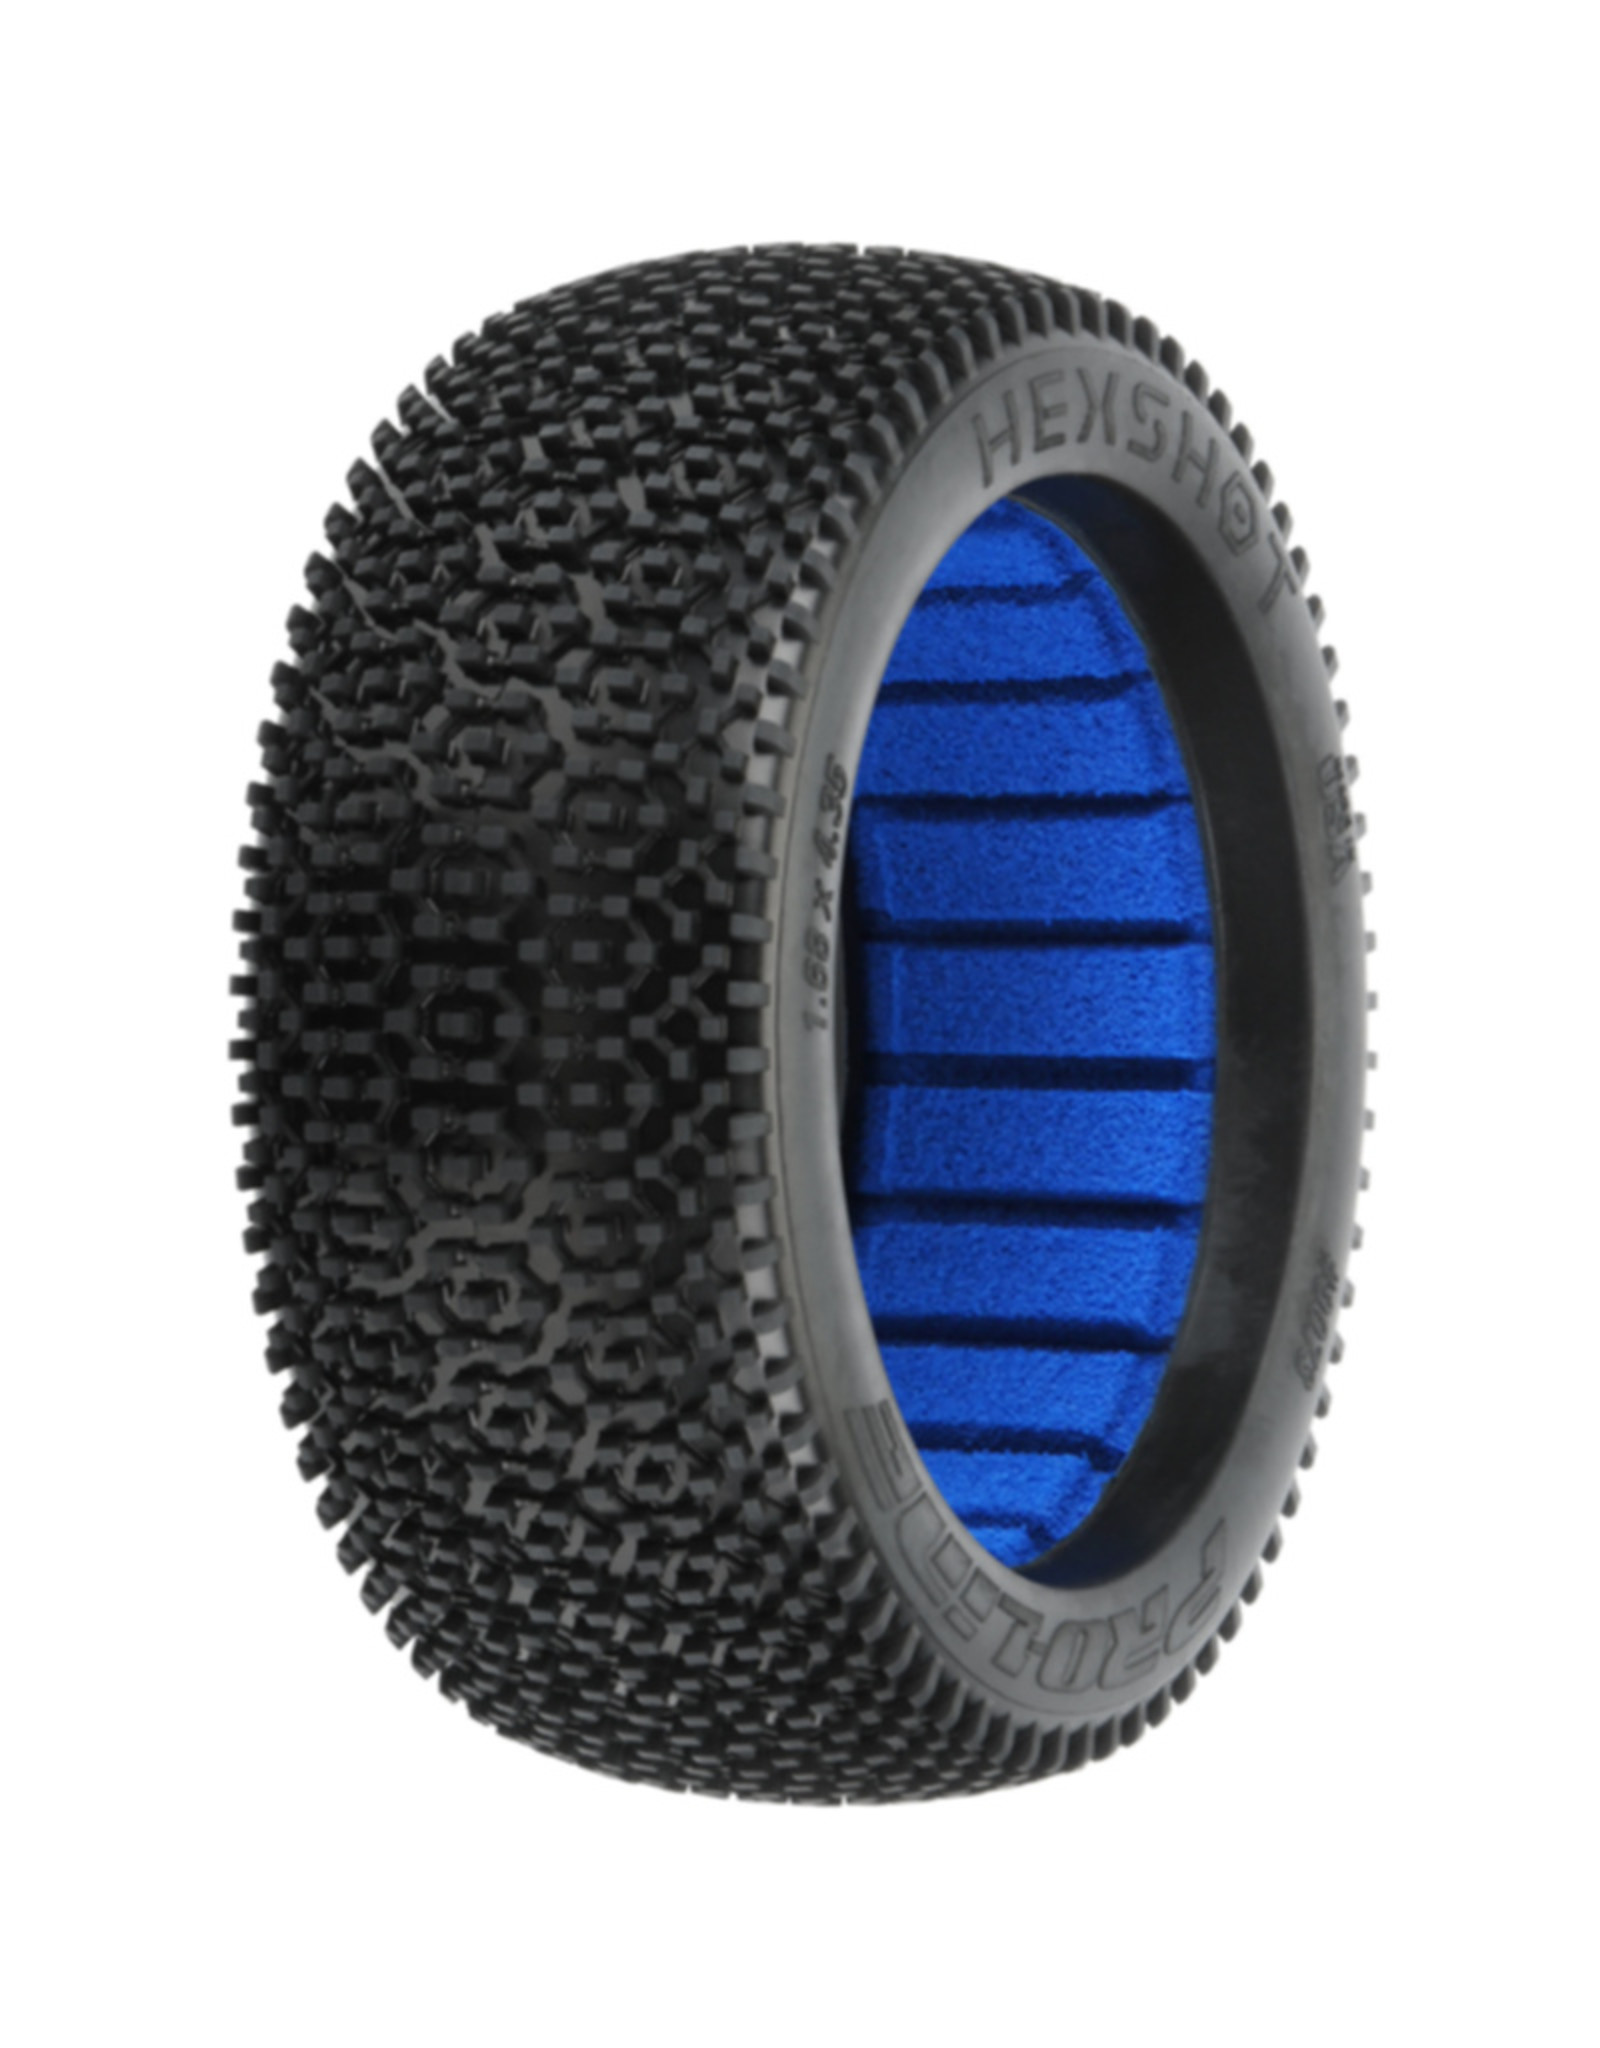 Pro-Line Racing PRO907302 1/8 Hex Shot M3 Front/Rear Off-Road Buggy Tires (2)